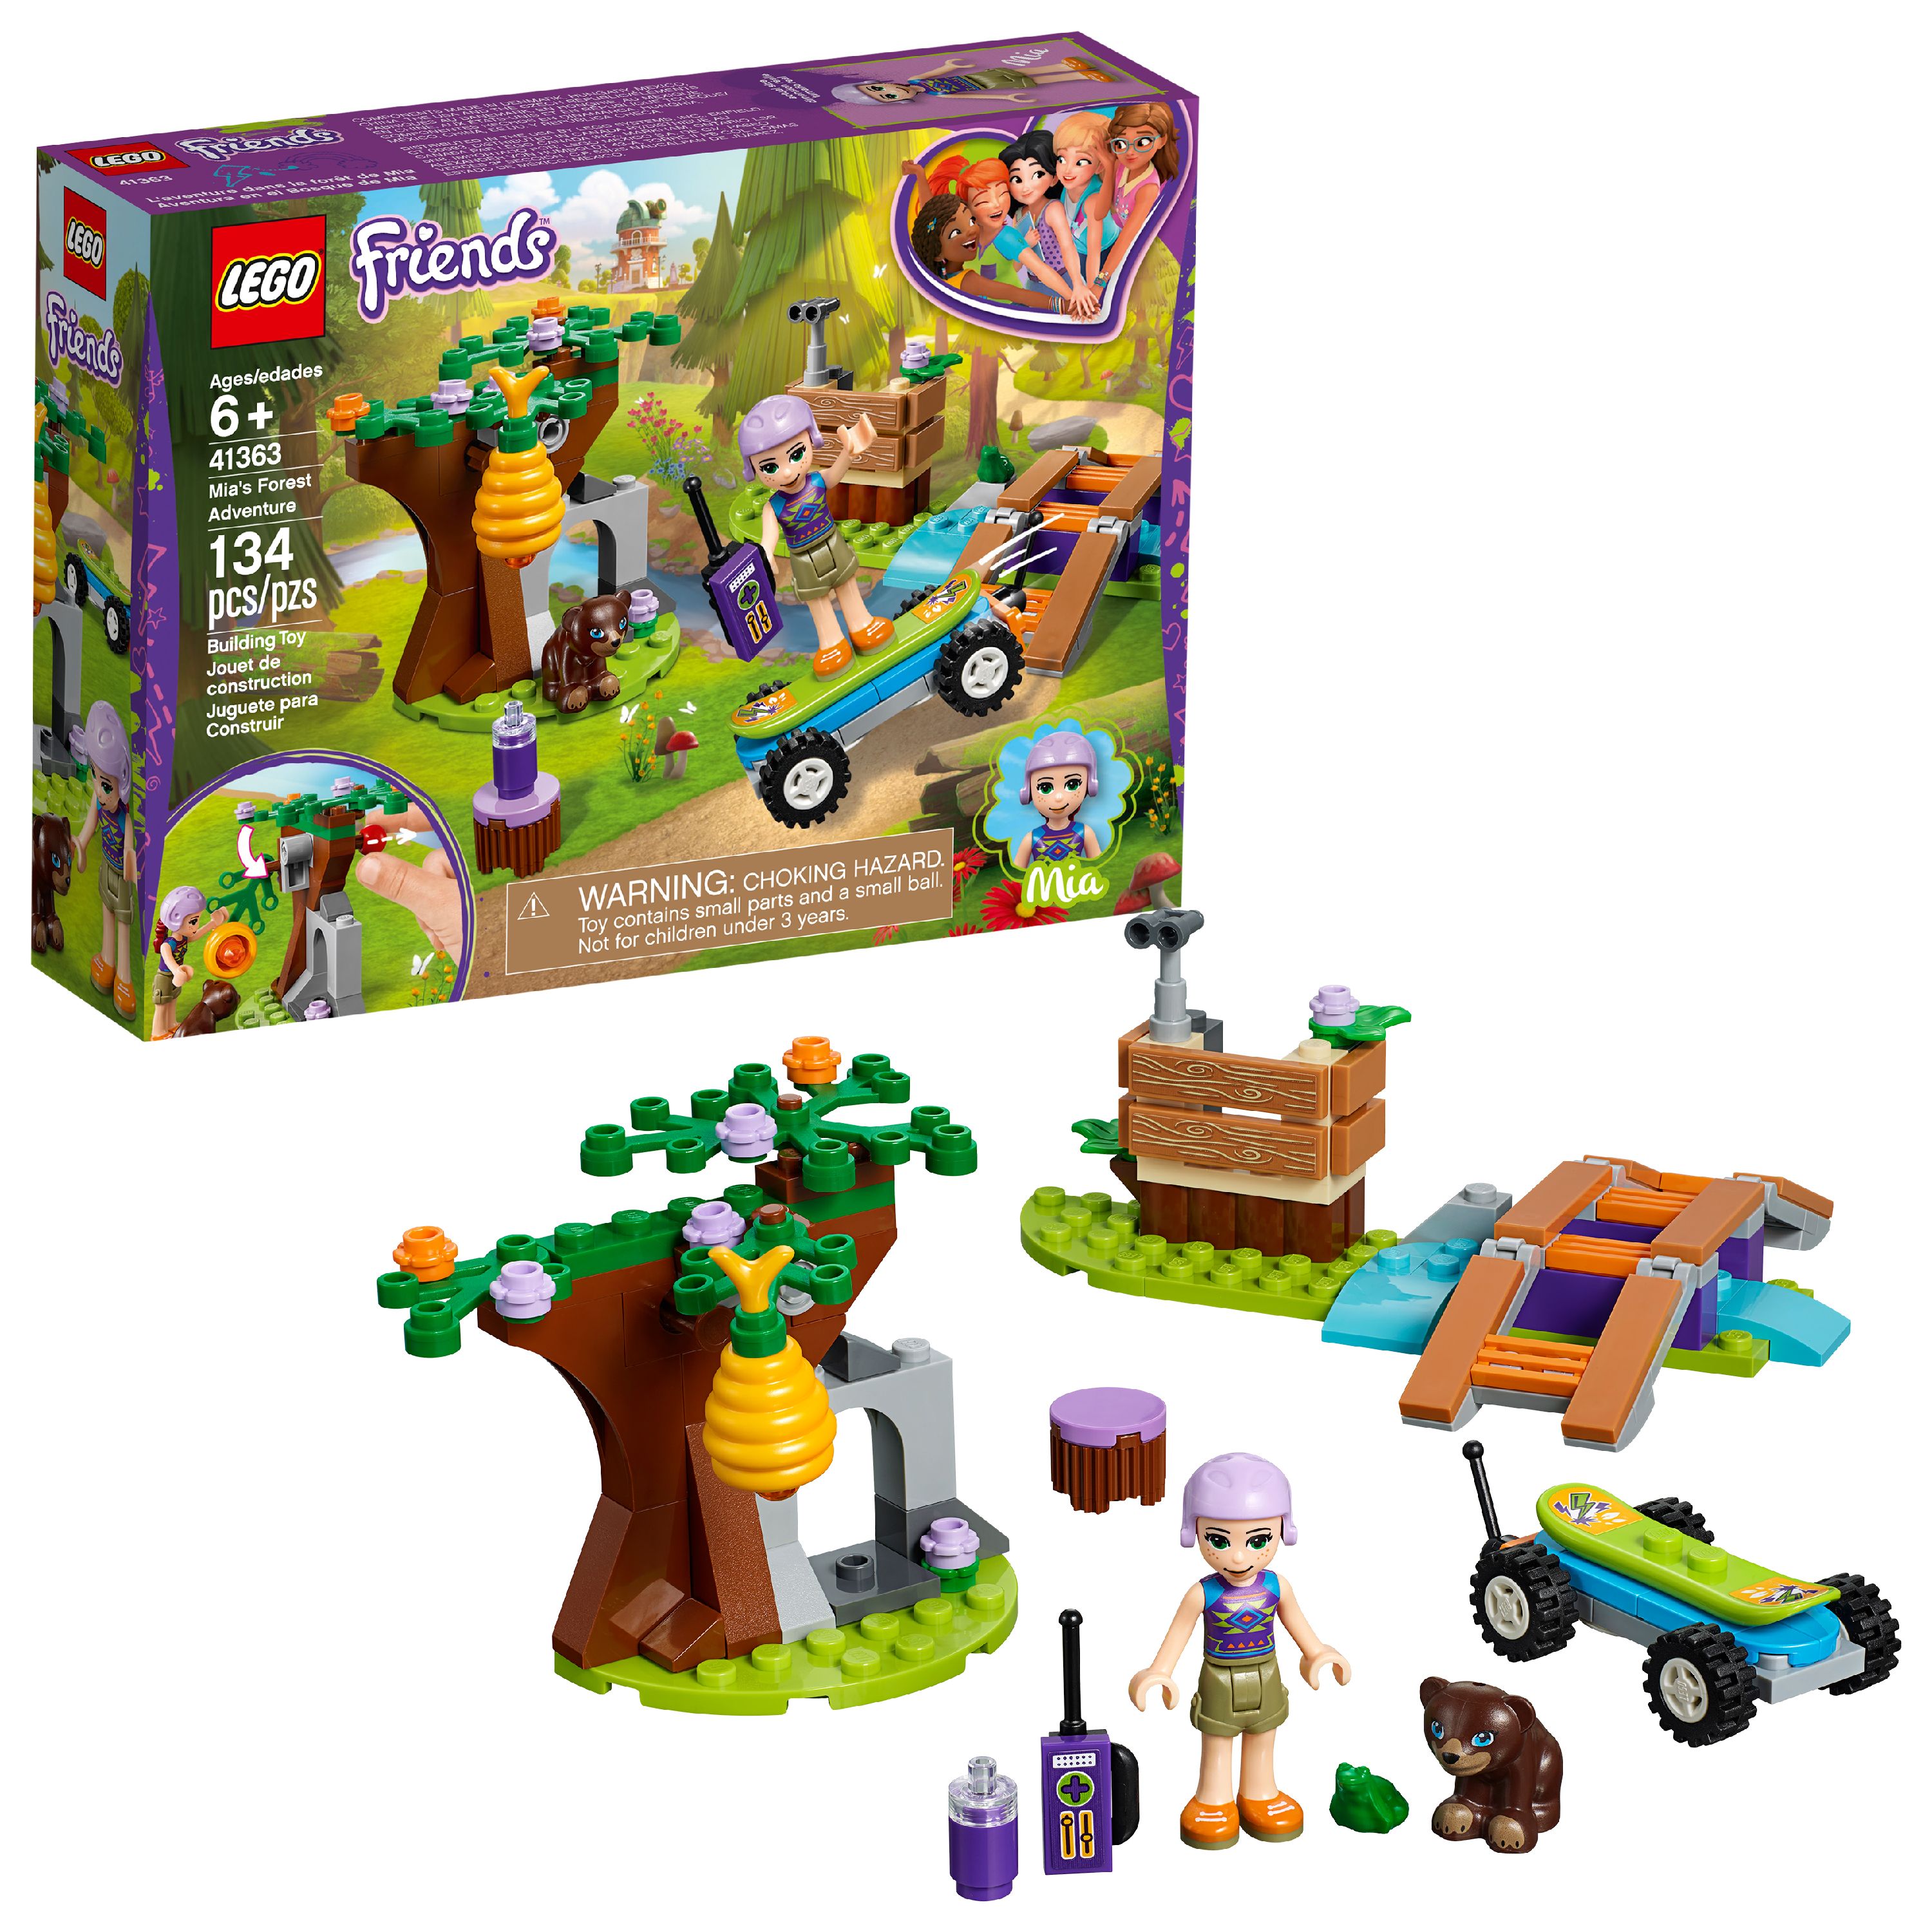 LEGO Friends Mia's Forest Adventure 41363 Building Set - image 1 of 8